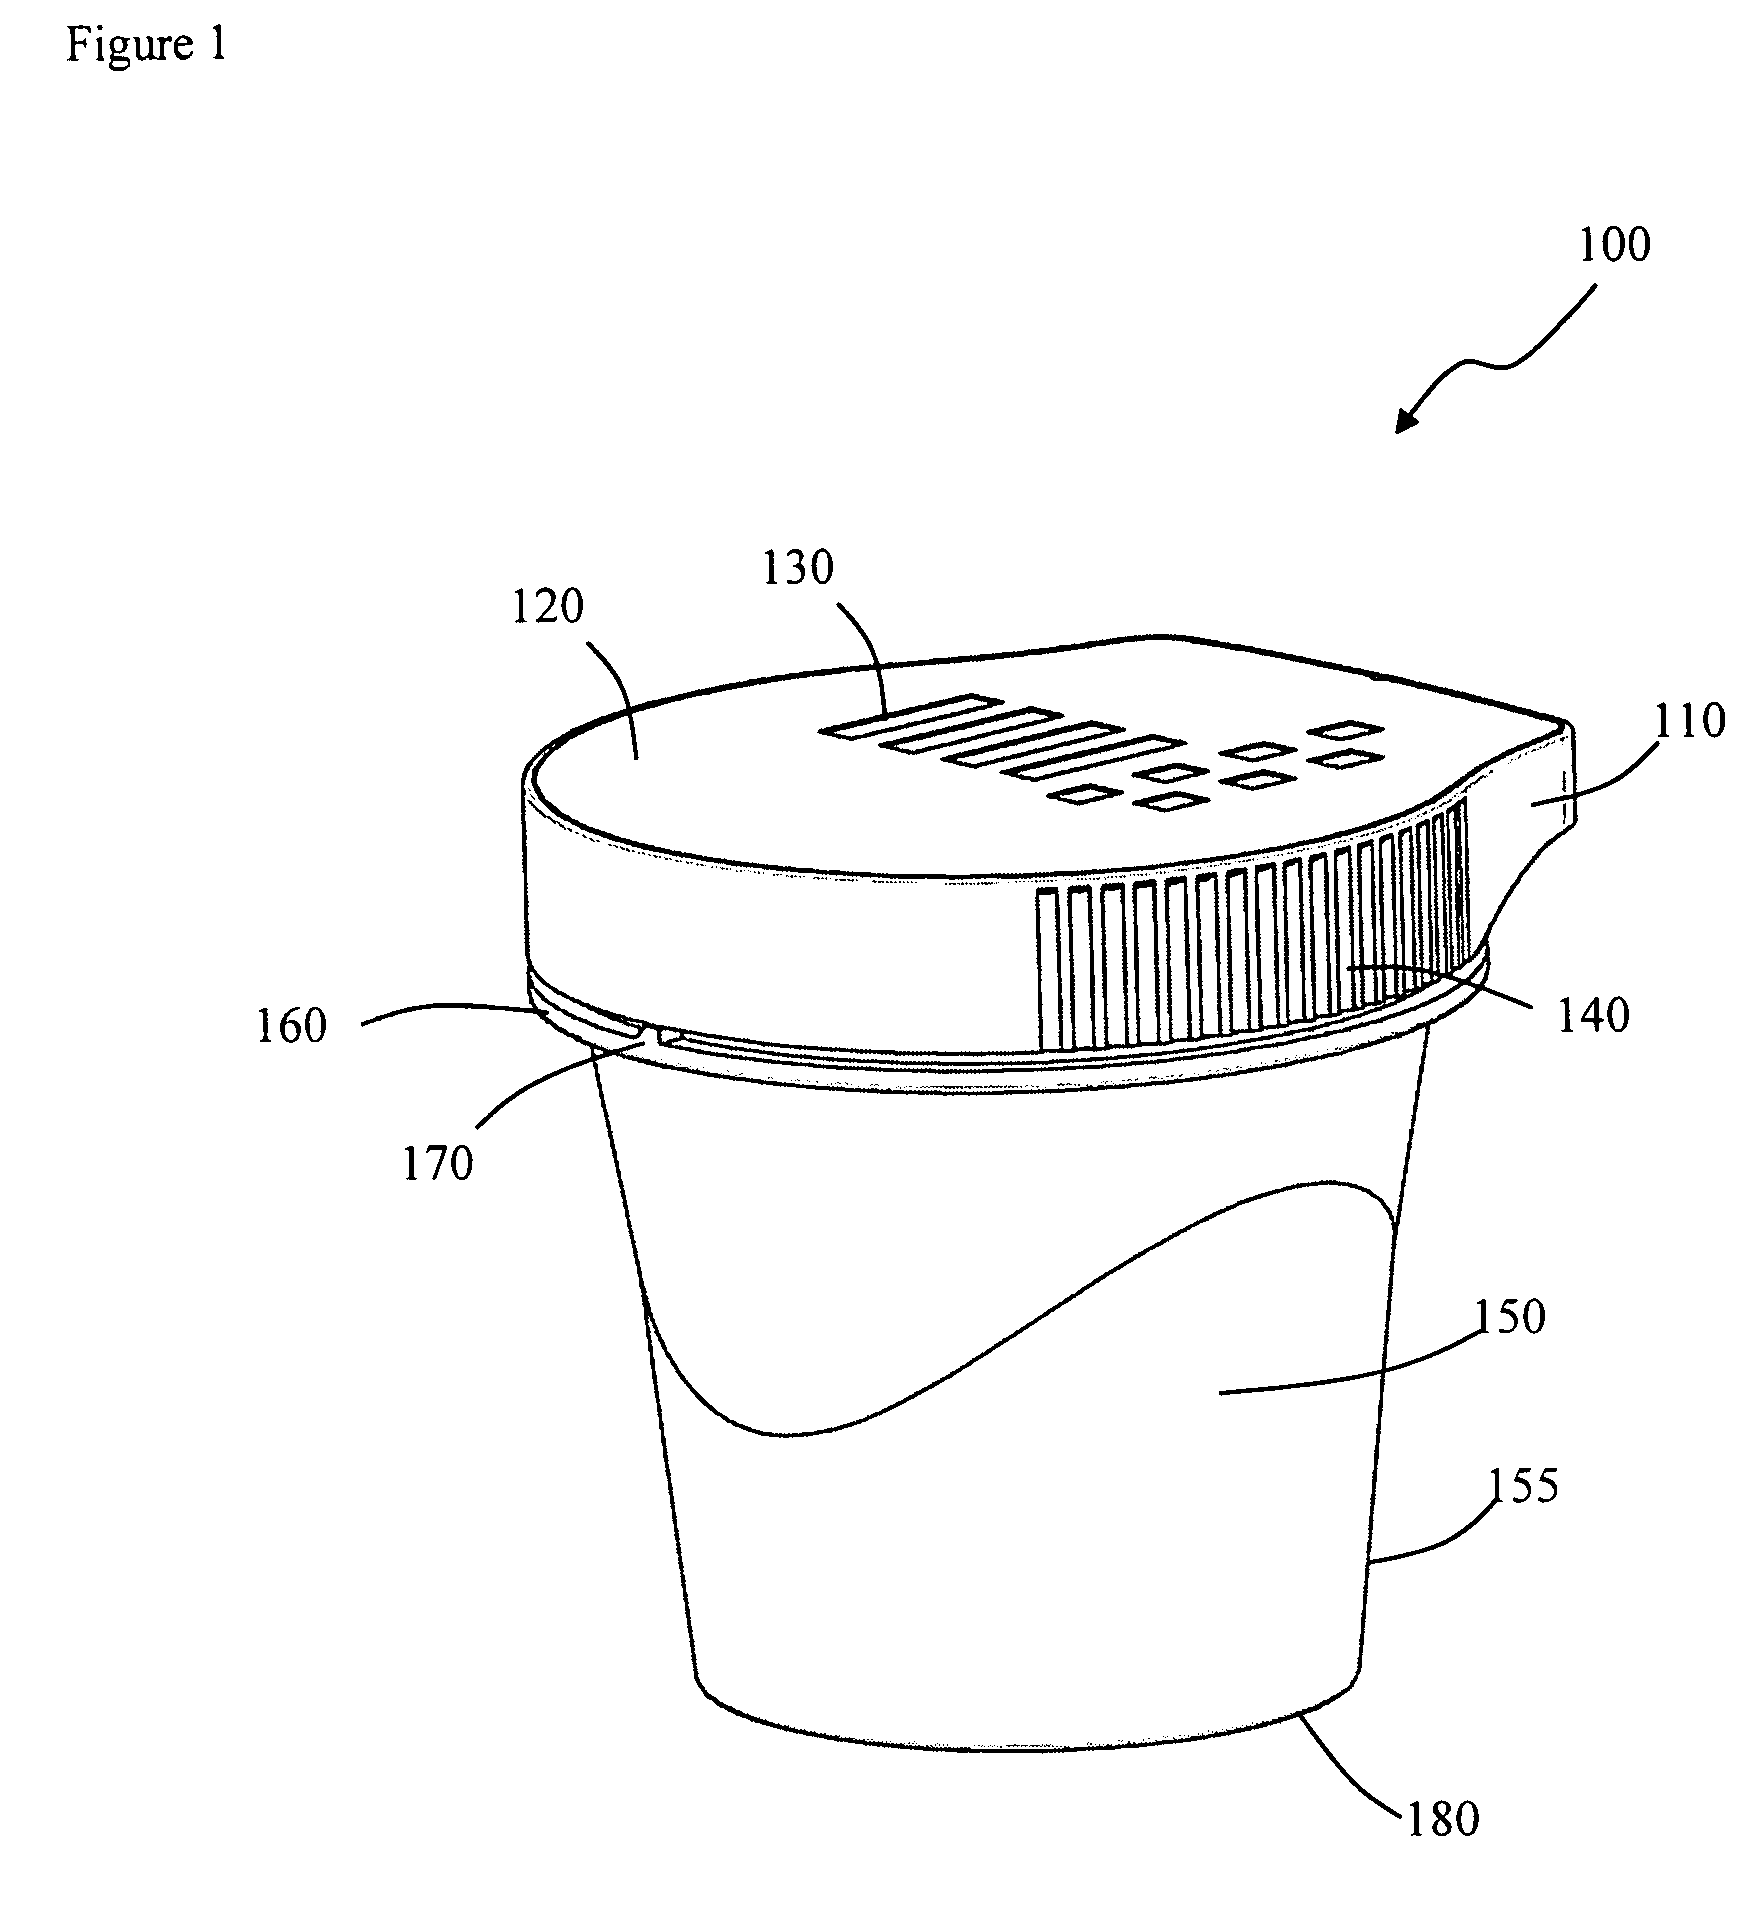 Sample collection cup with integrated sample analysis system